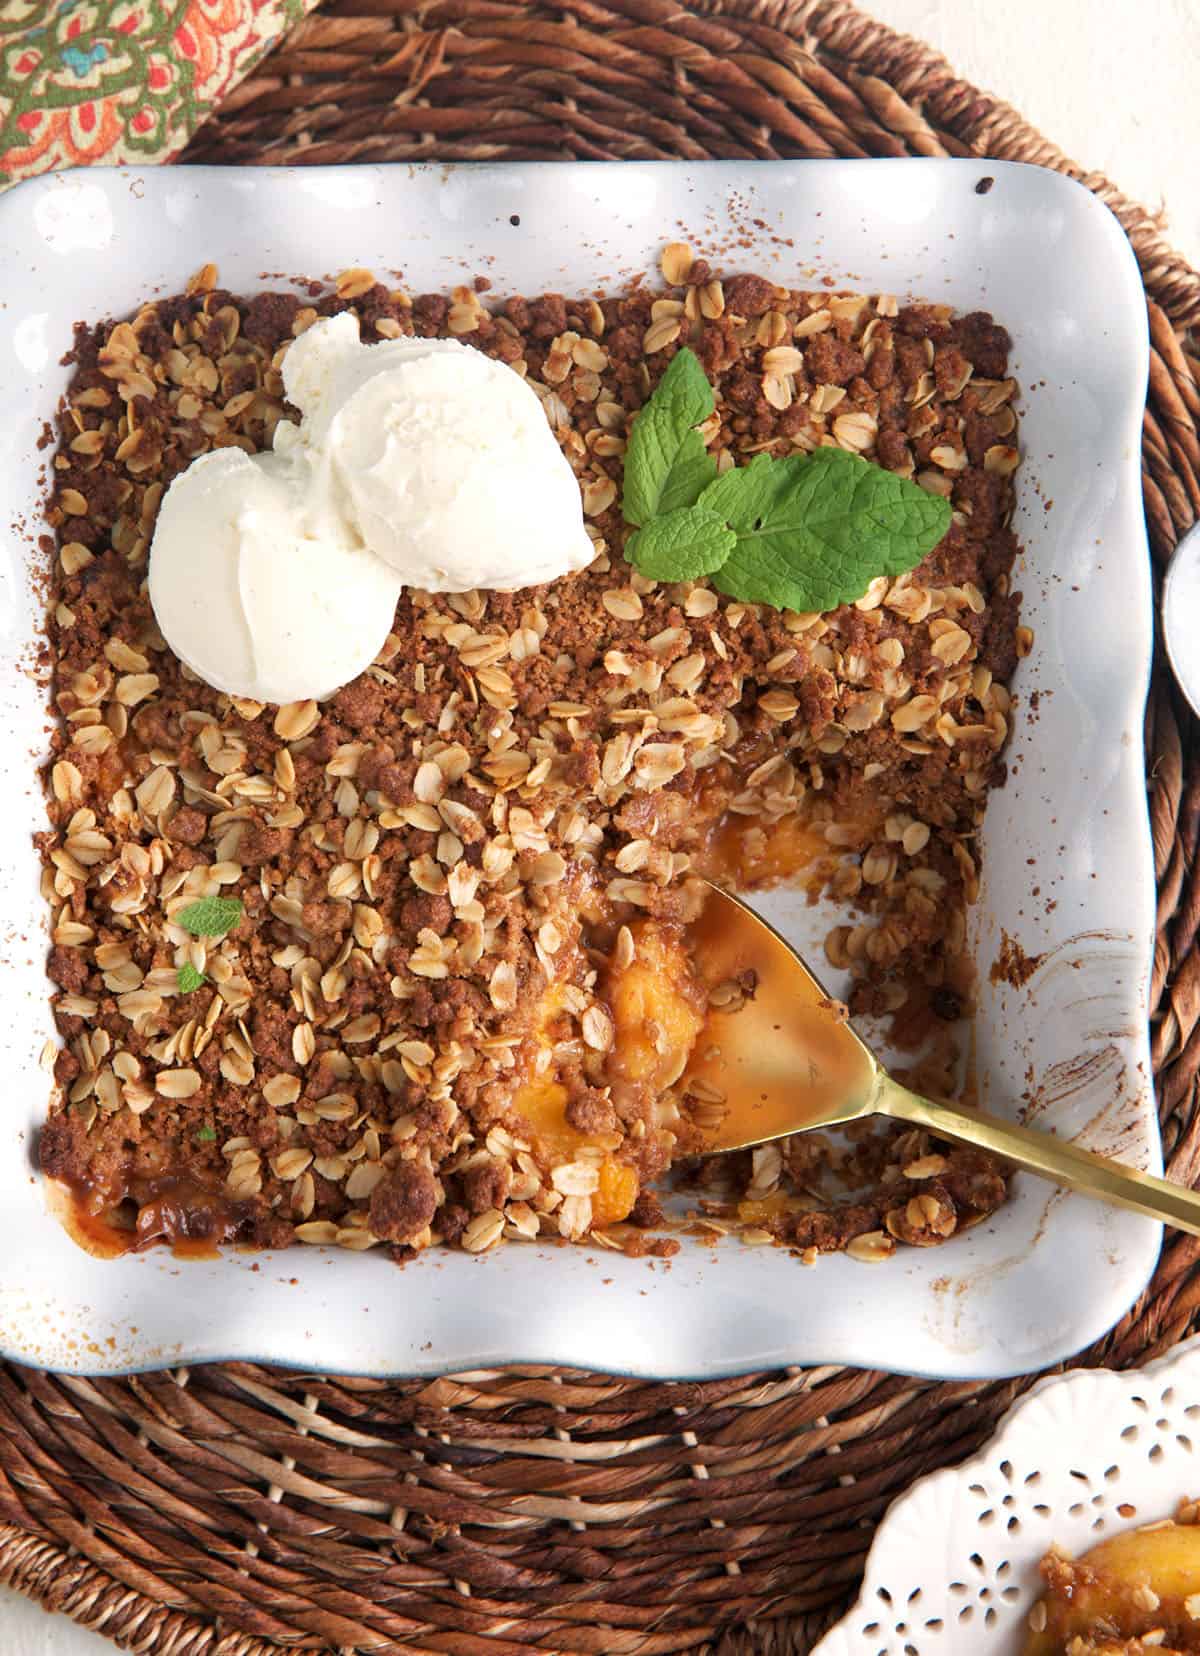 Two scoops of ice cream are placed on top of a peach crisp. 